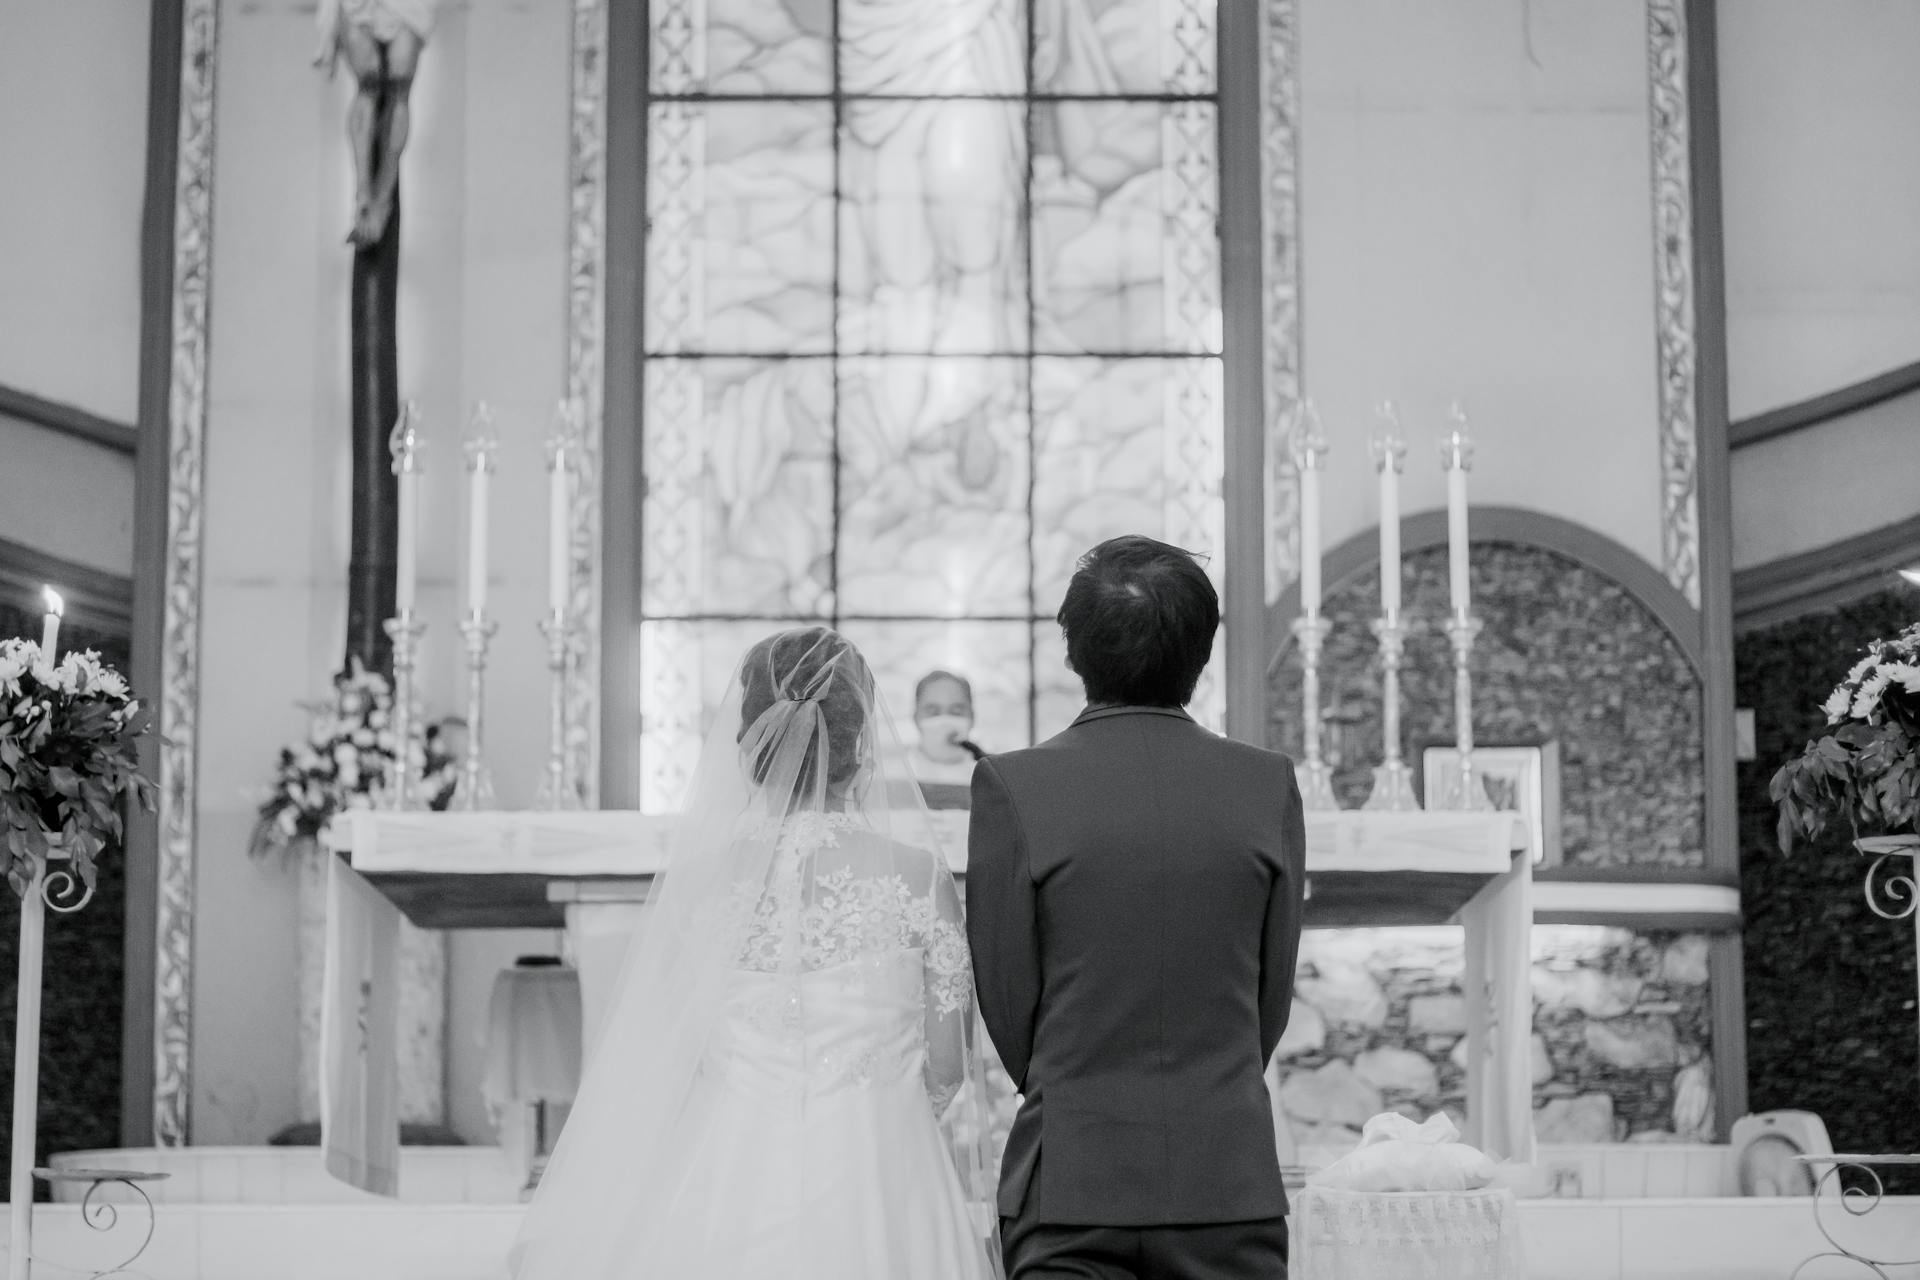 A couple at the altar | Source: Pexels